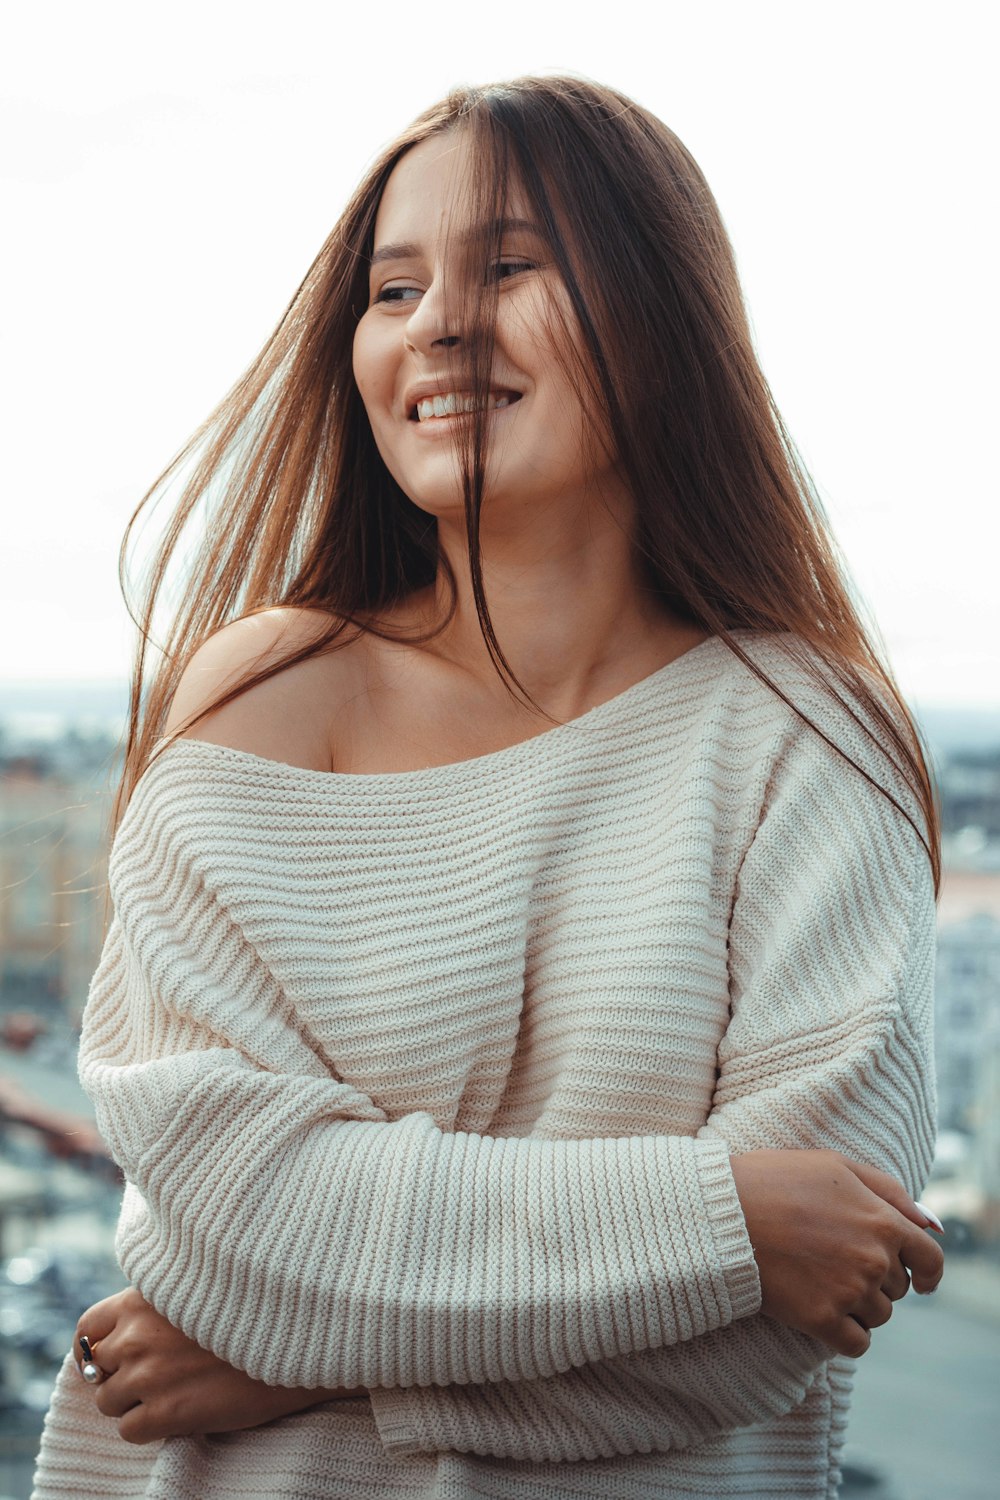 woman wearing white striped sweater laughing while standing